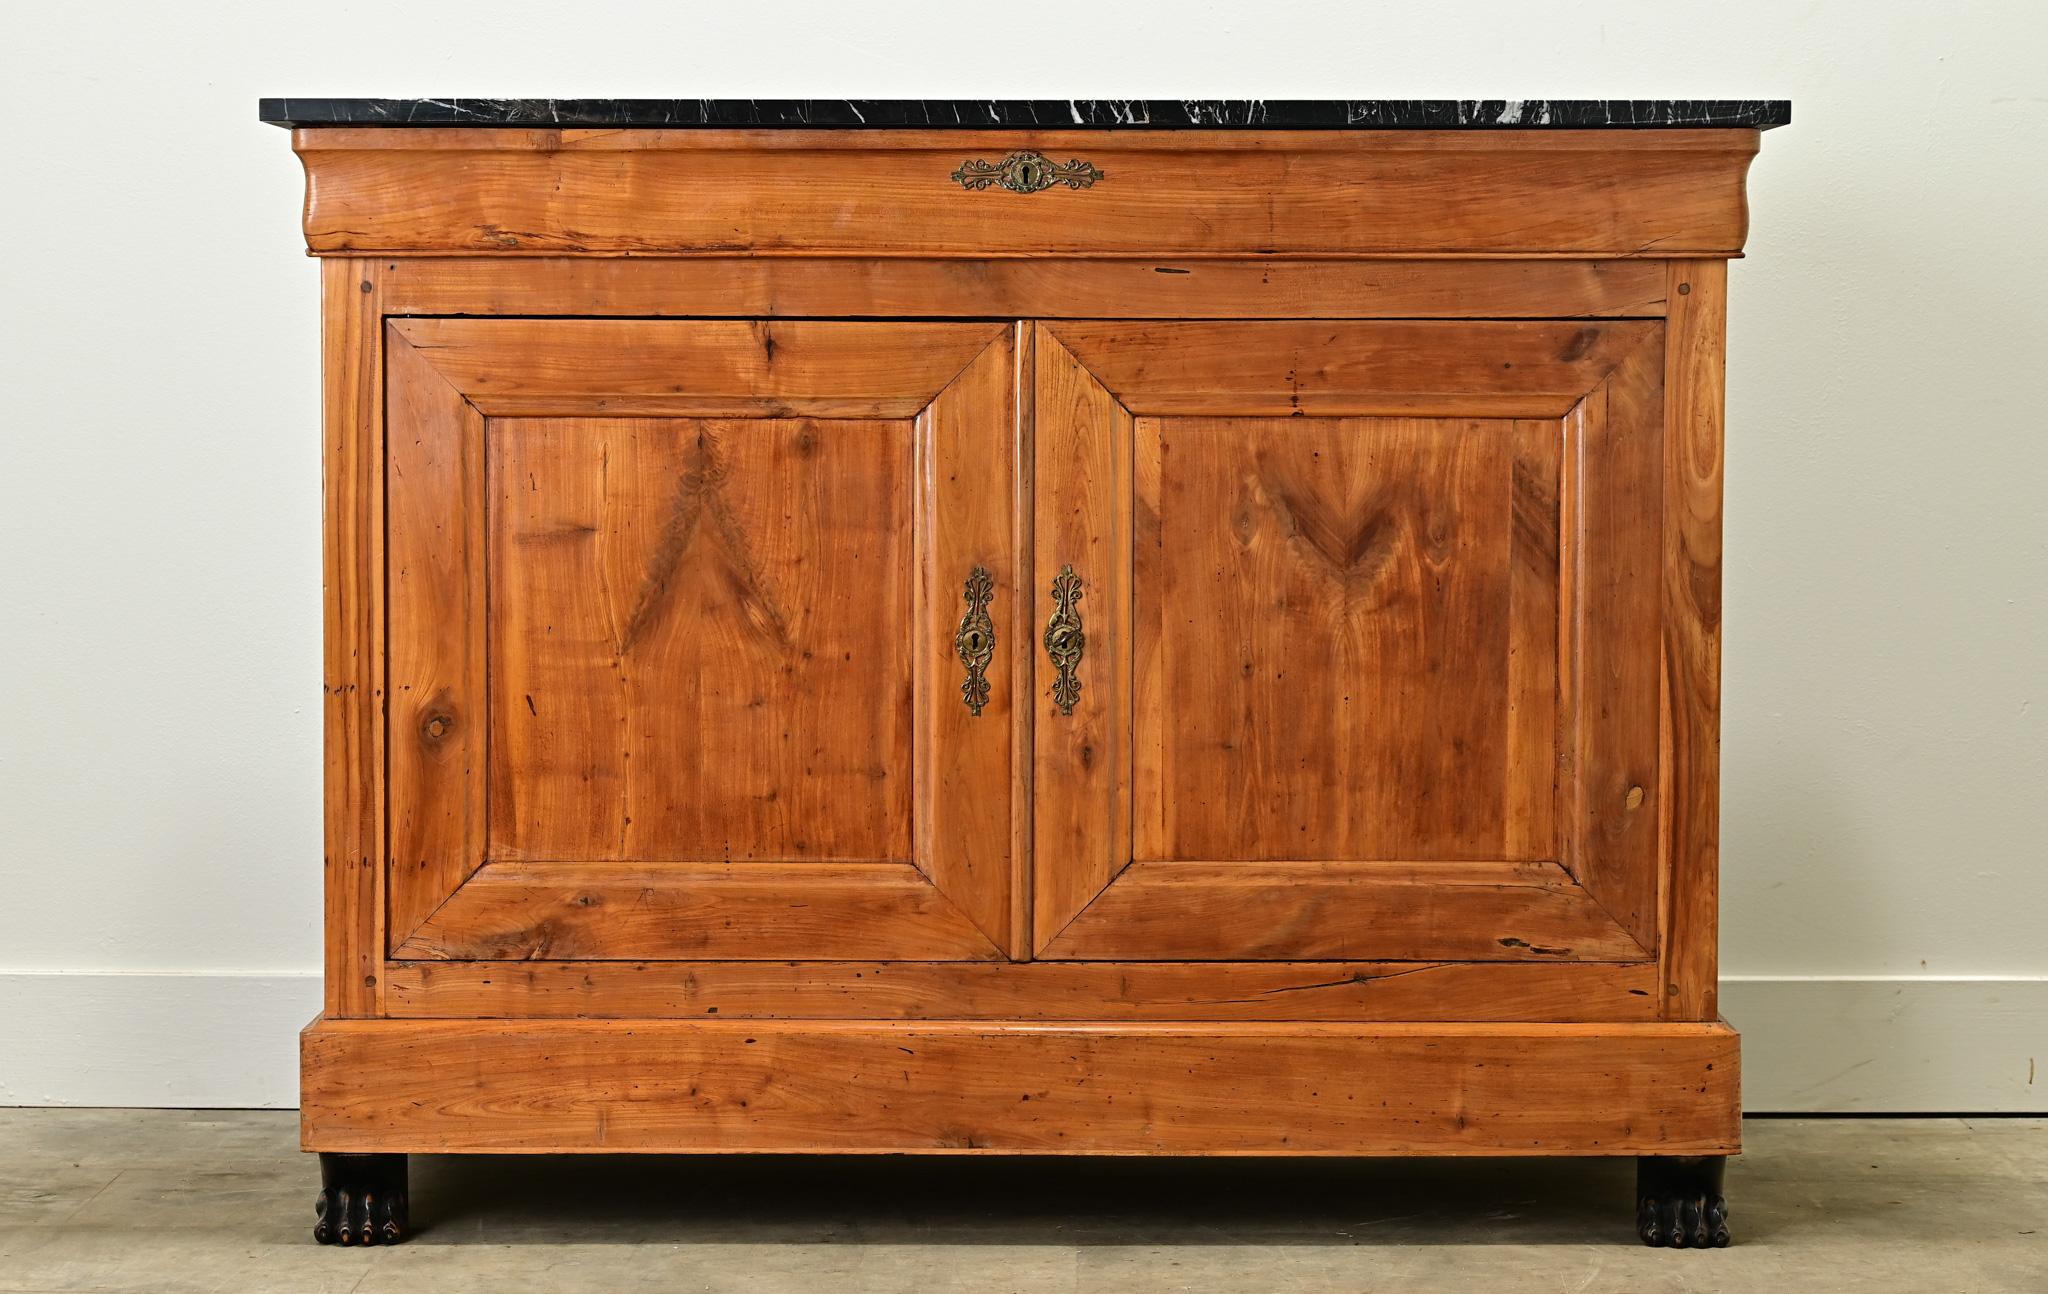 A handsome Dutch fruitwood buffet with ebonized details blends the French styles of Louis Philippe and Empire. A new black marble top sits above a long single drawer with a working lock surrounded by a decorative escutcheon plate. Below is a pair of